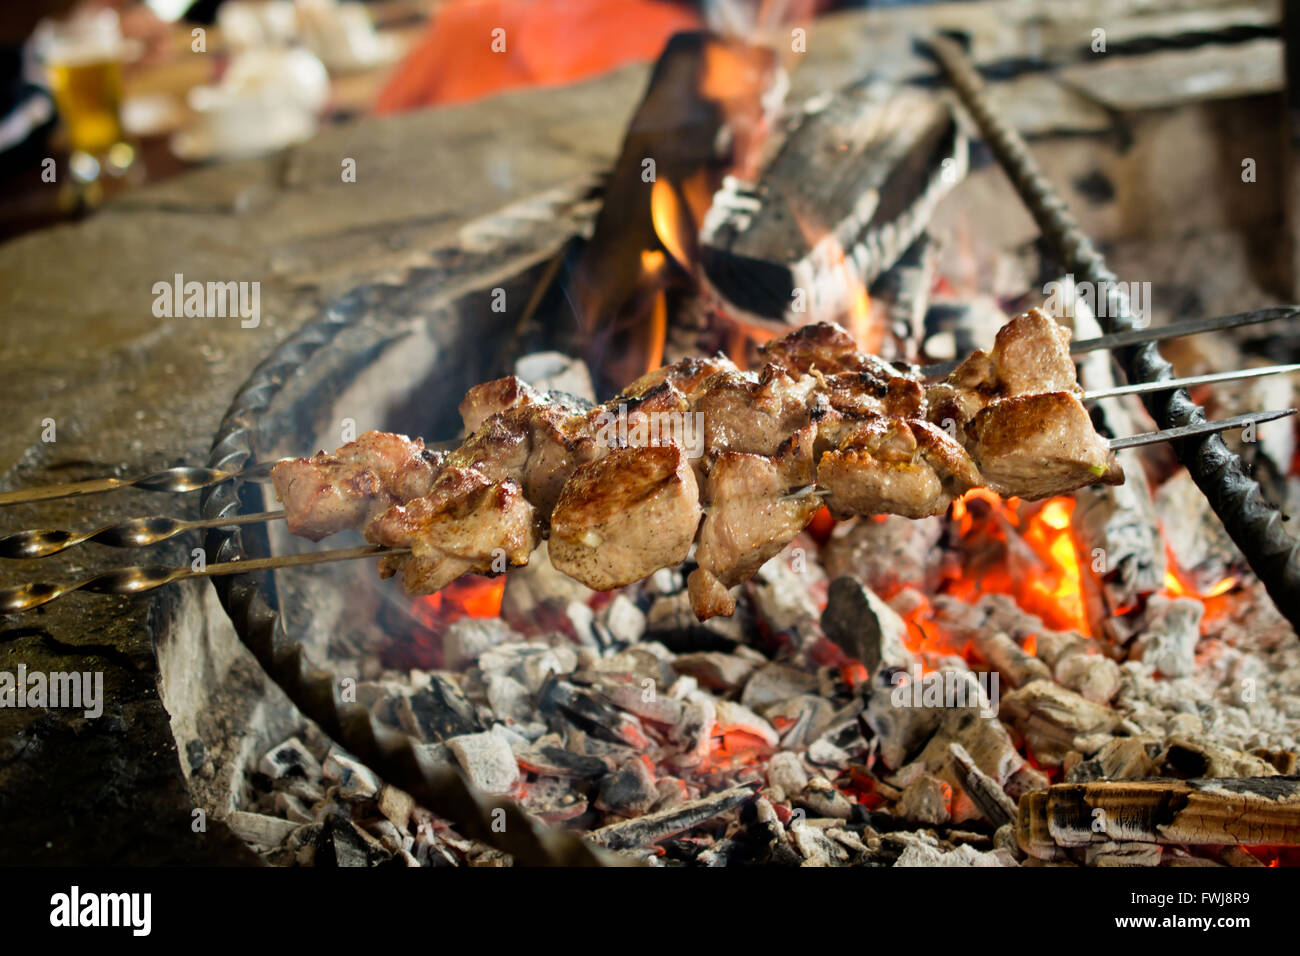 Close-Up Of Meat On Skewer Over Burning Coal Stock Photo